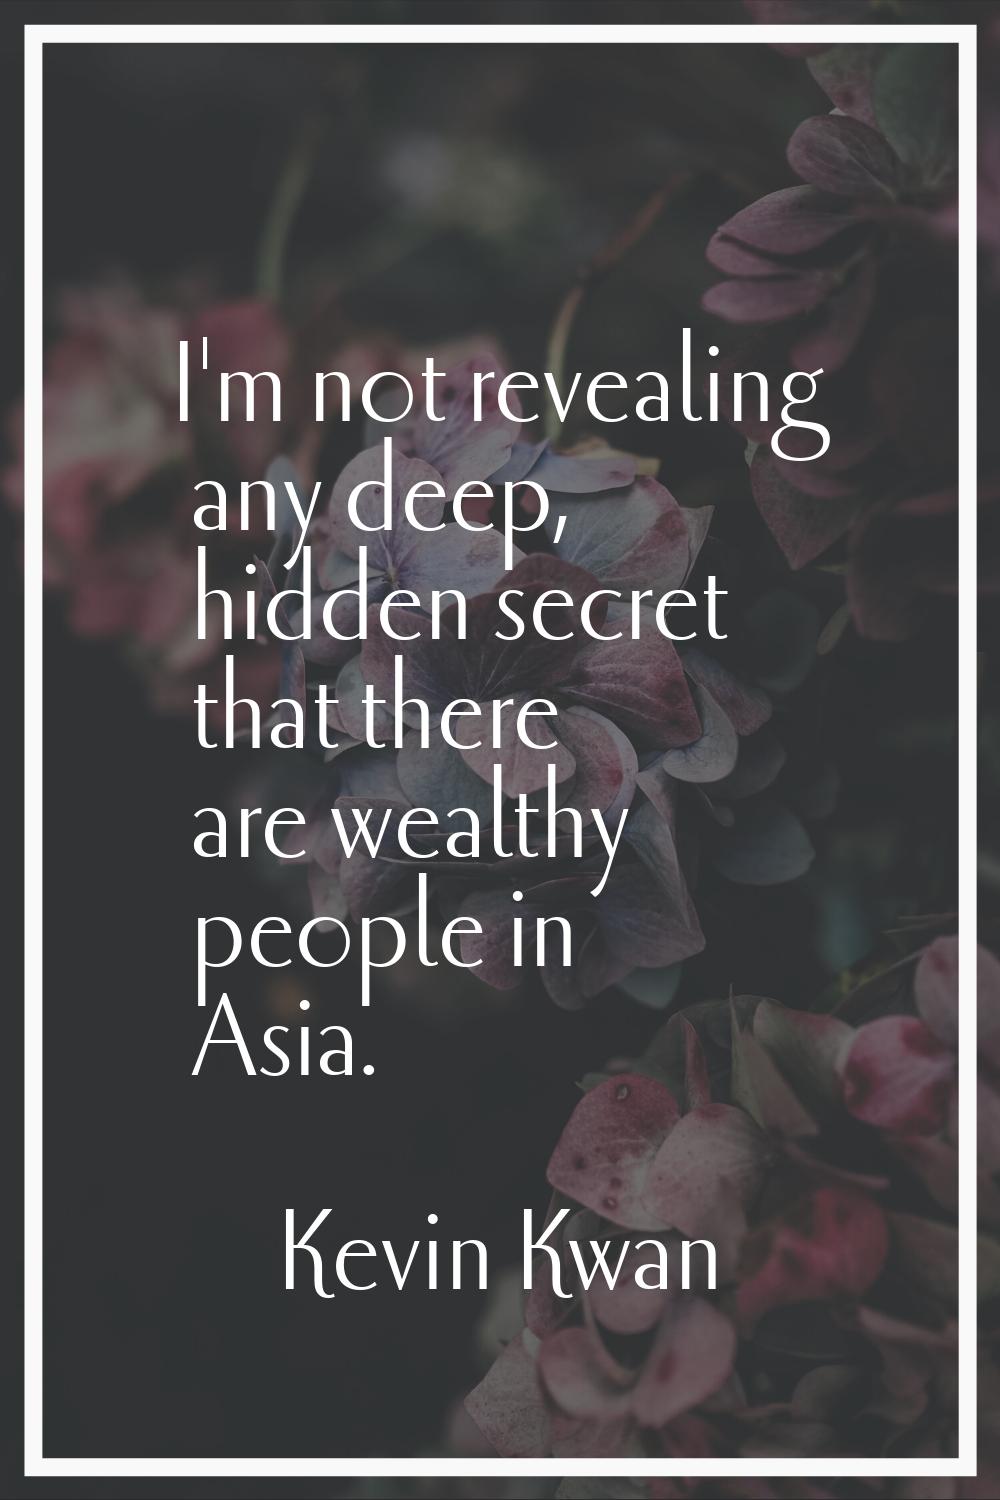 I'm not revealing any deep, hidden secret that there are wealthy people in Asia.